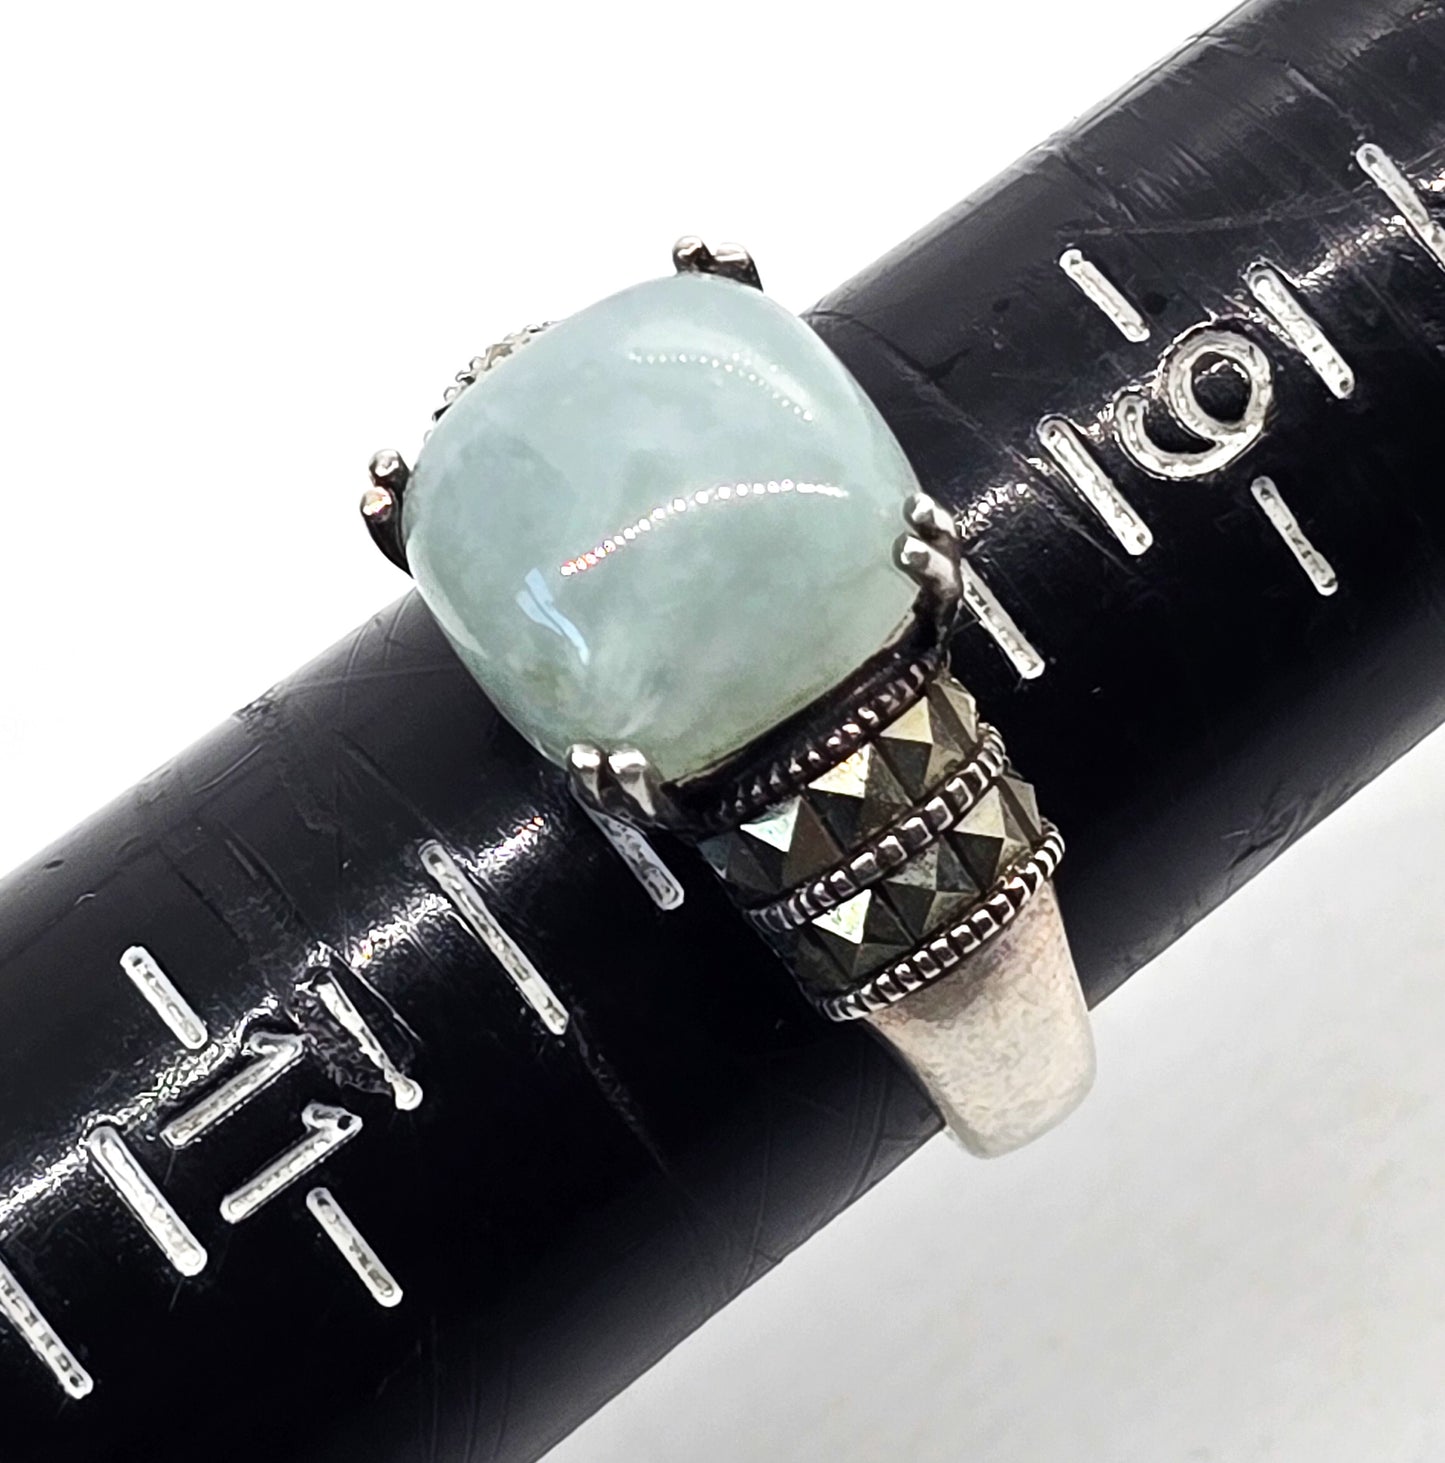 Milky Aquamarine and marcasite  heart setting vintage sterling silver ring size 10